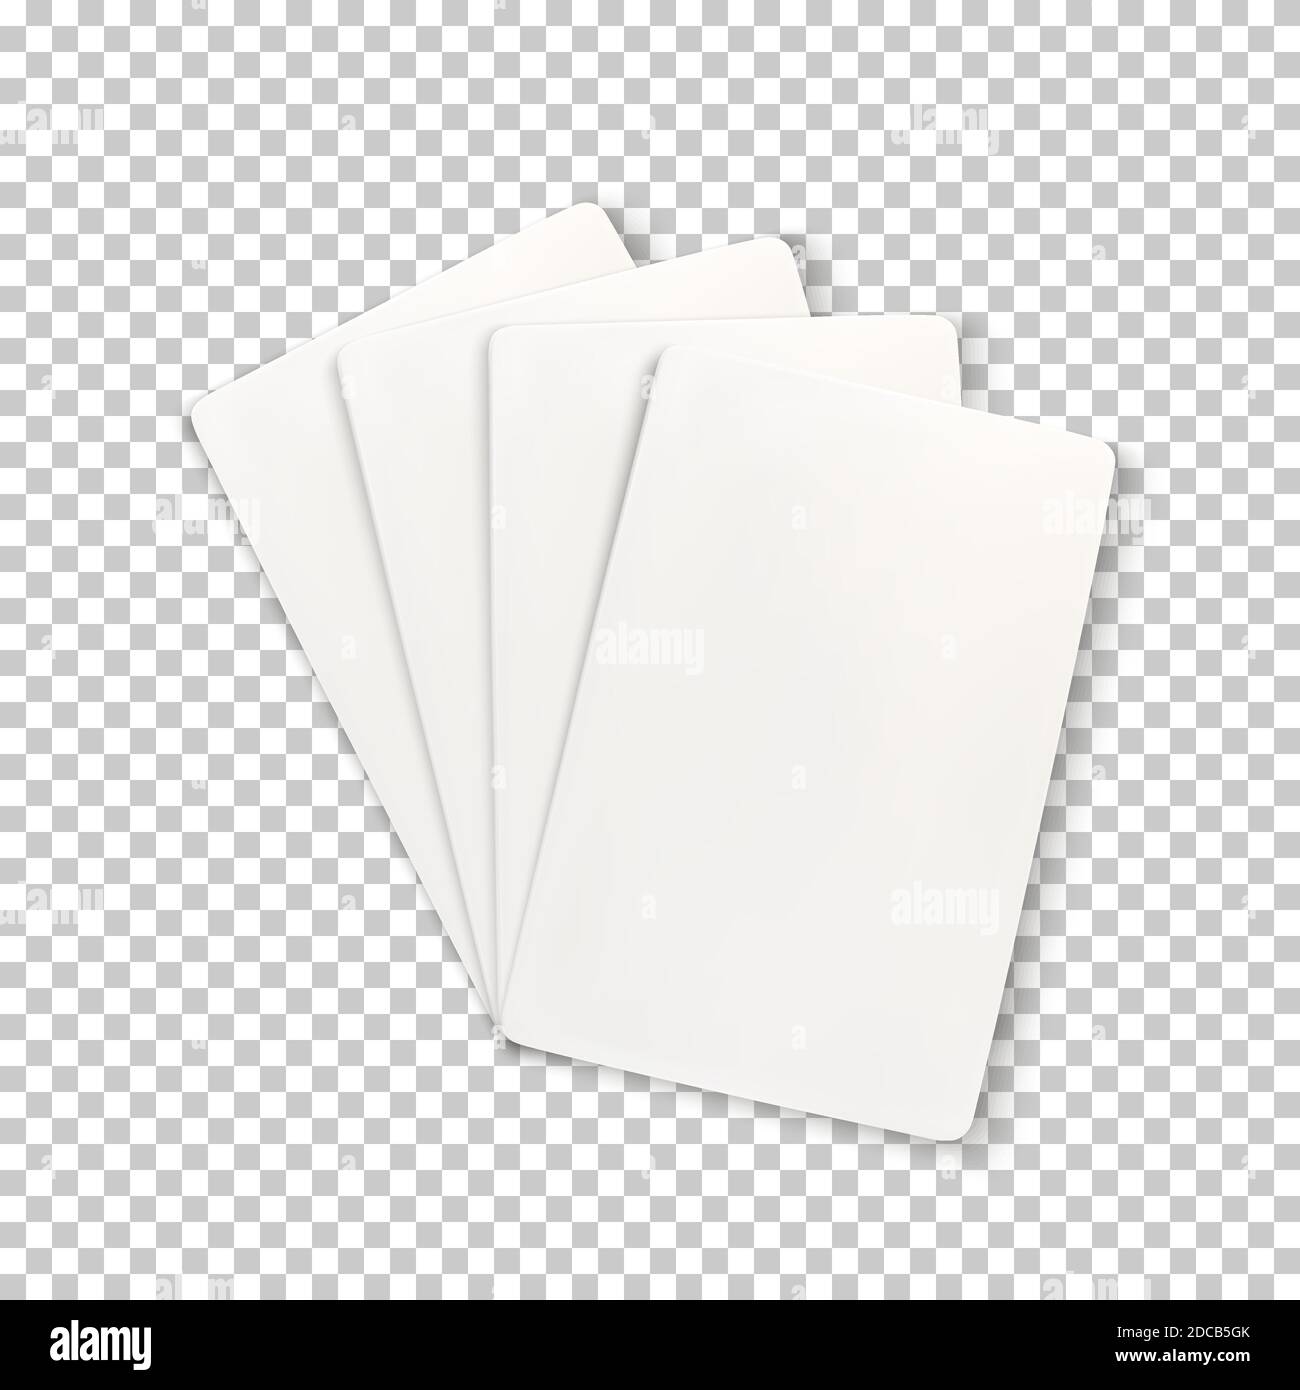 Blank playing cards. Template for your successful projects Stock